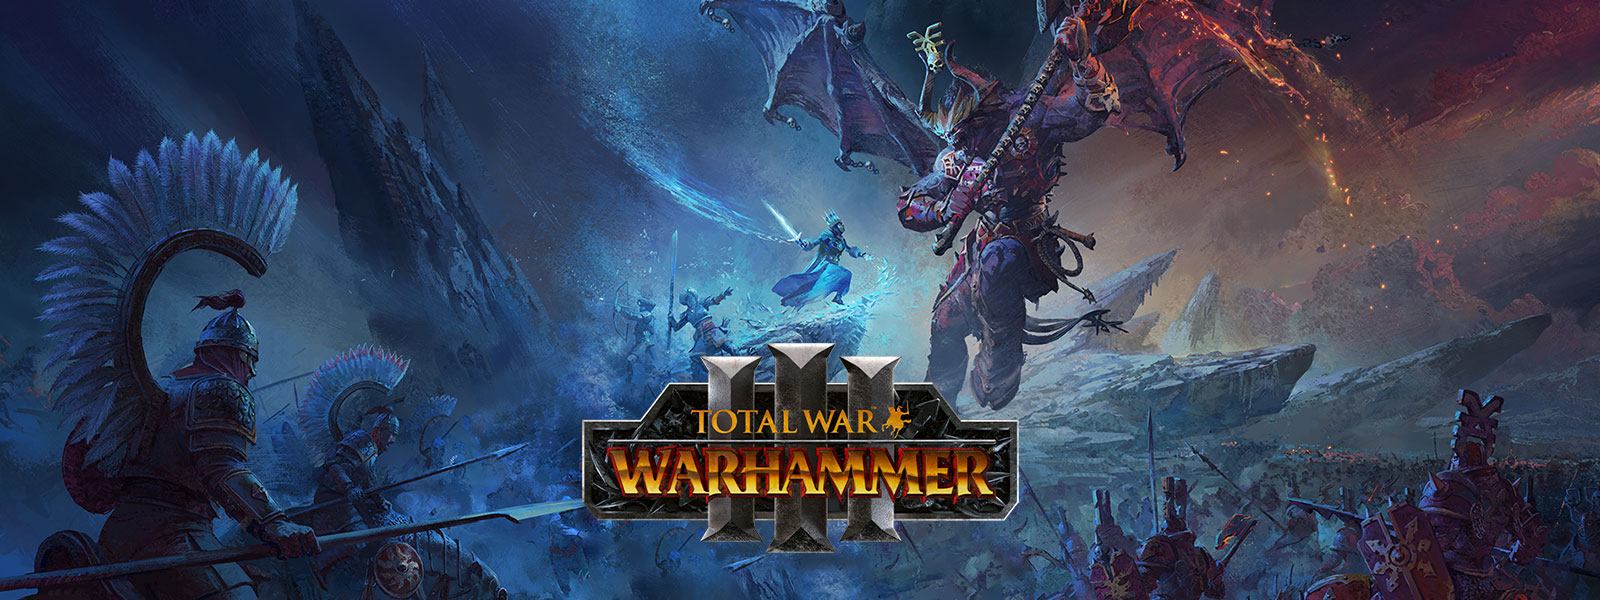 Total War Warhammer 3, An ice wizard faces off against a giant dragon demon above a battlefield.